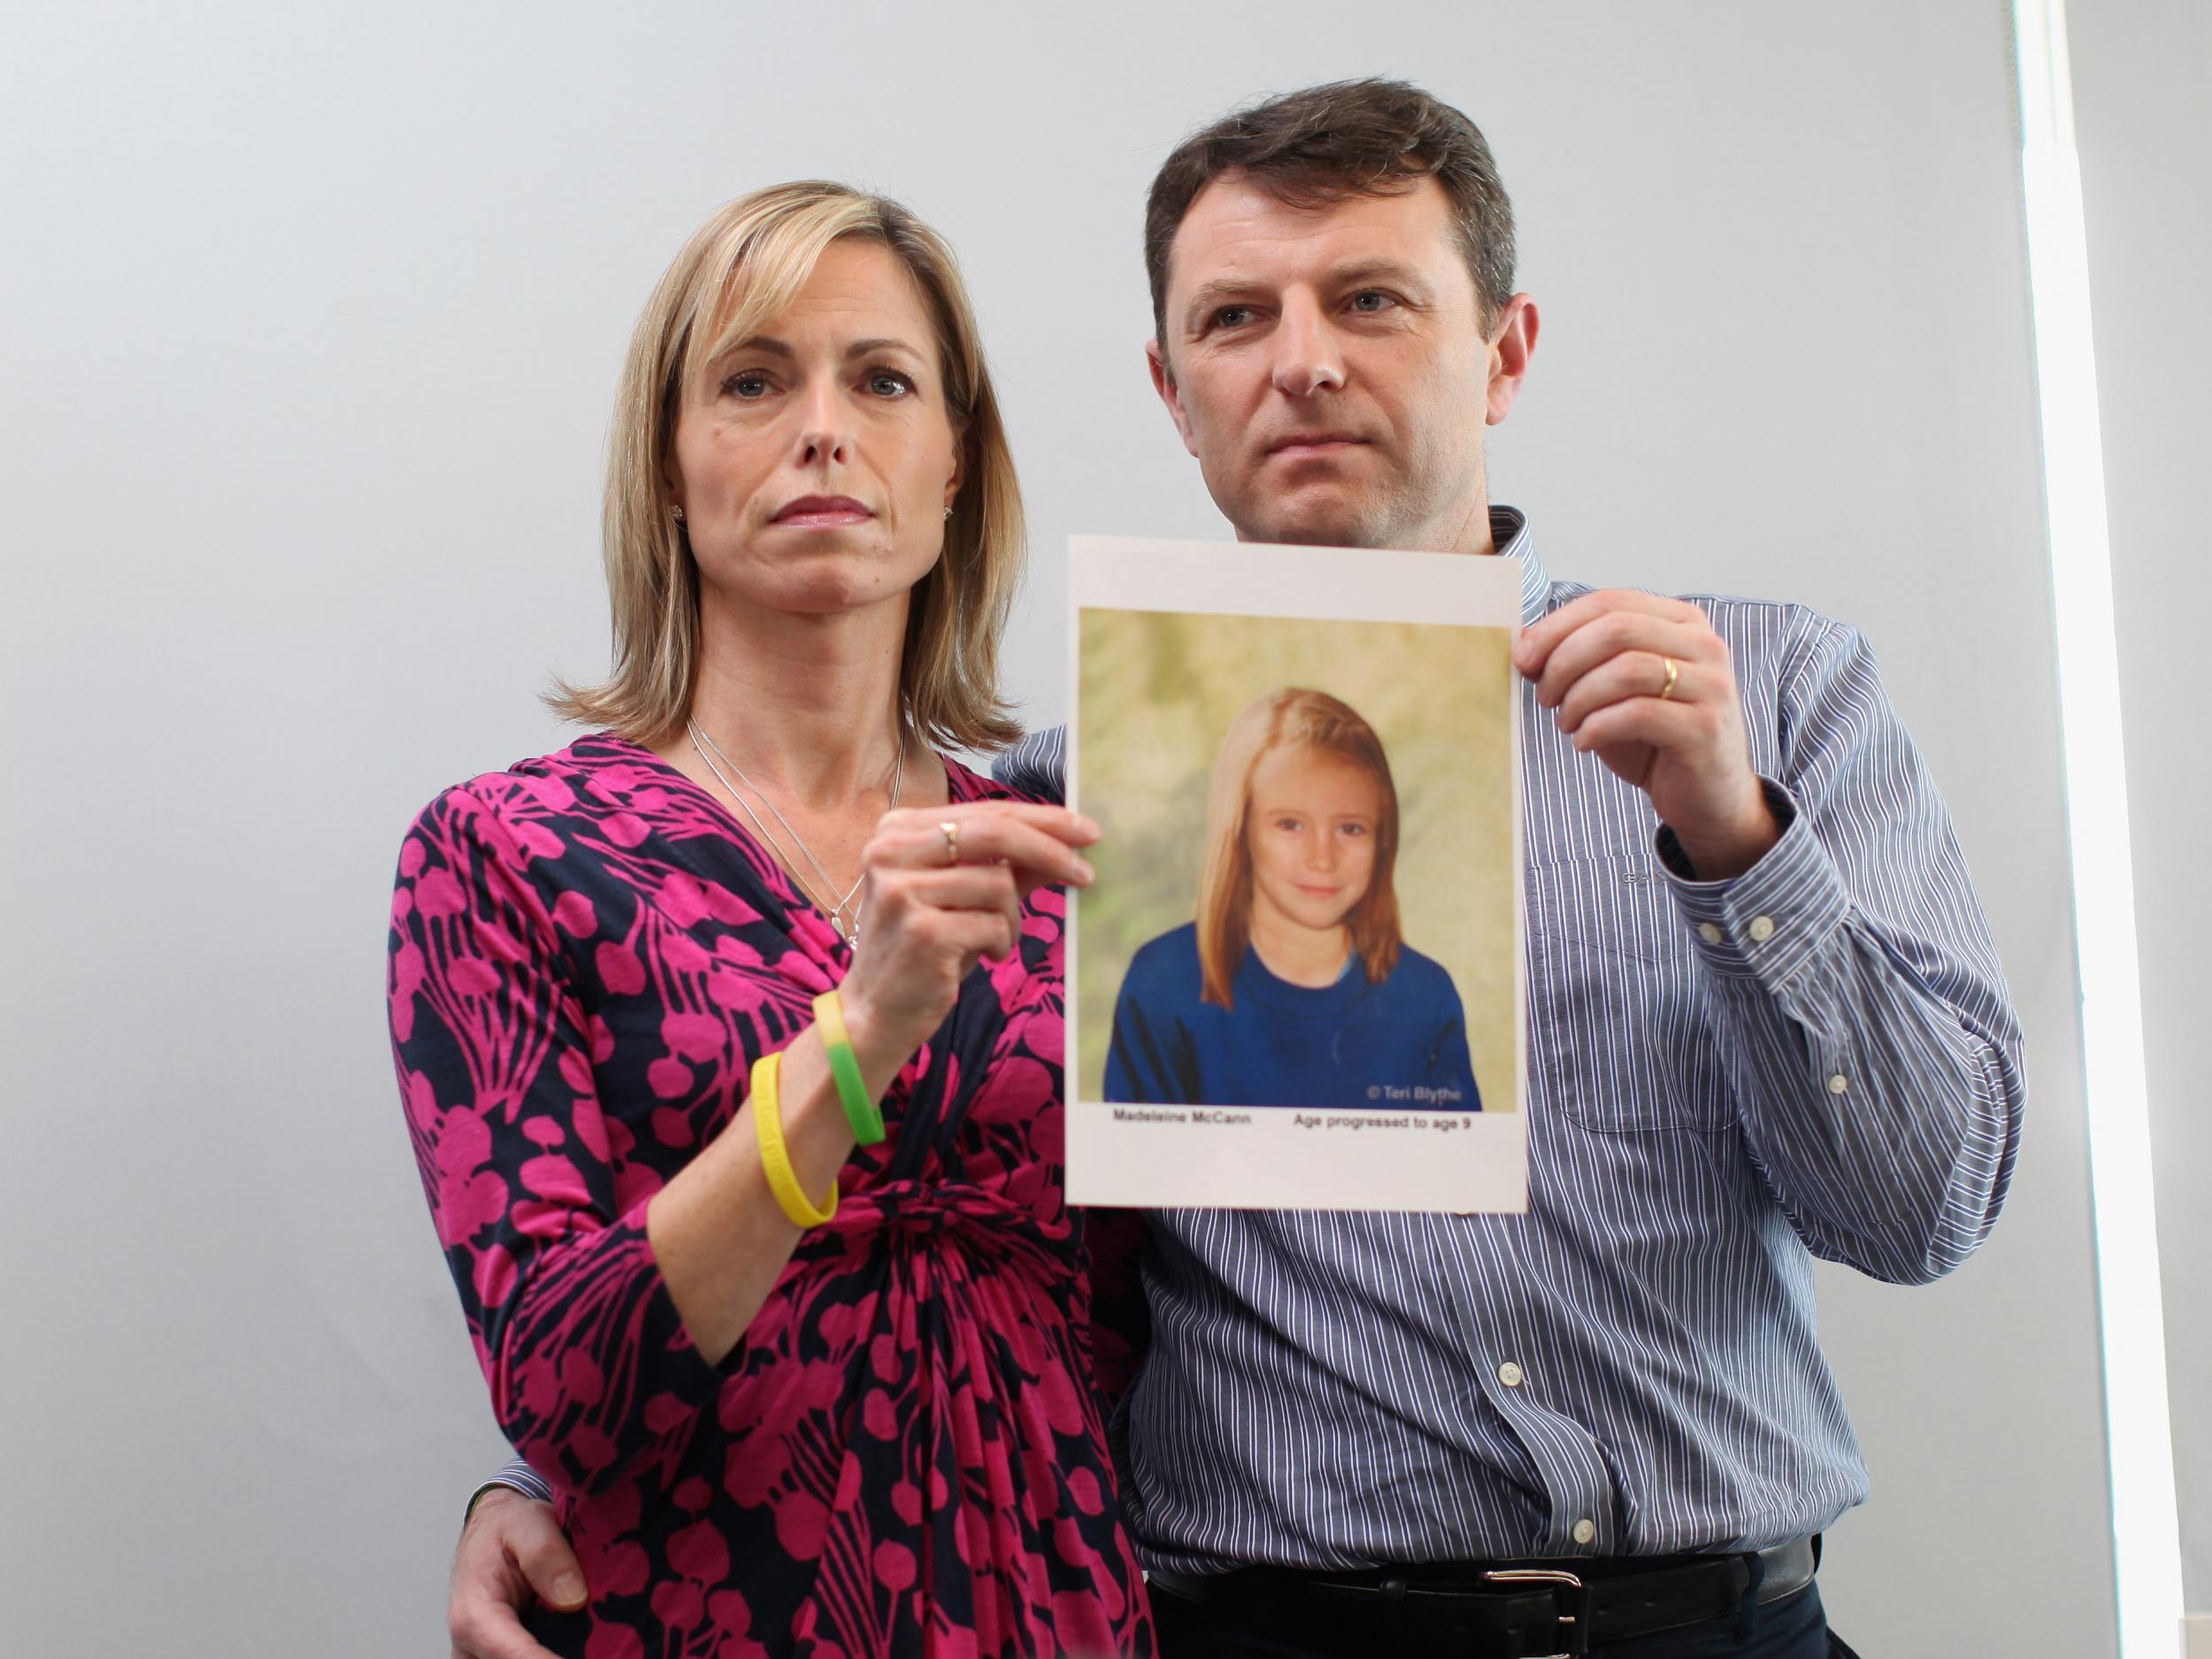 Madeleine's parents, Kate and Gerry McCann, were named as suspects at one point by Portuguese police